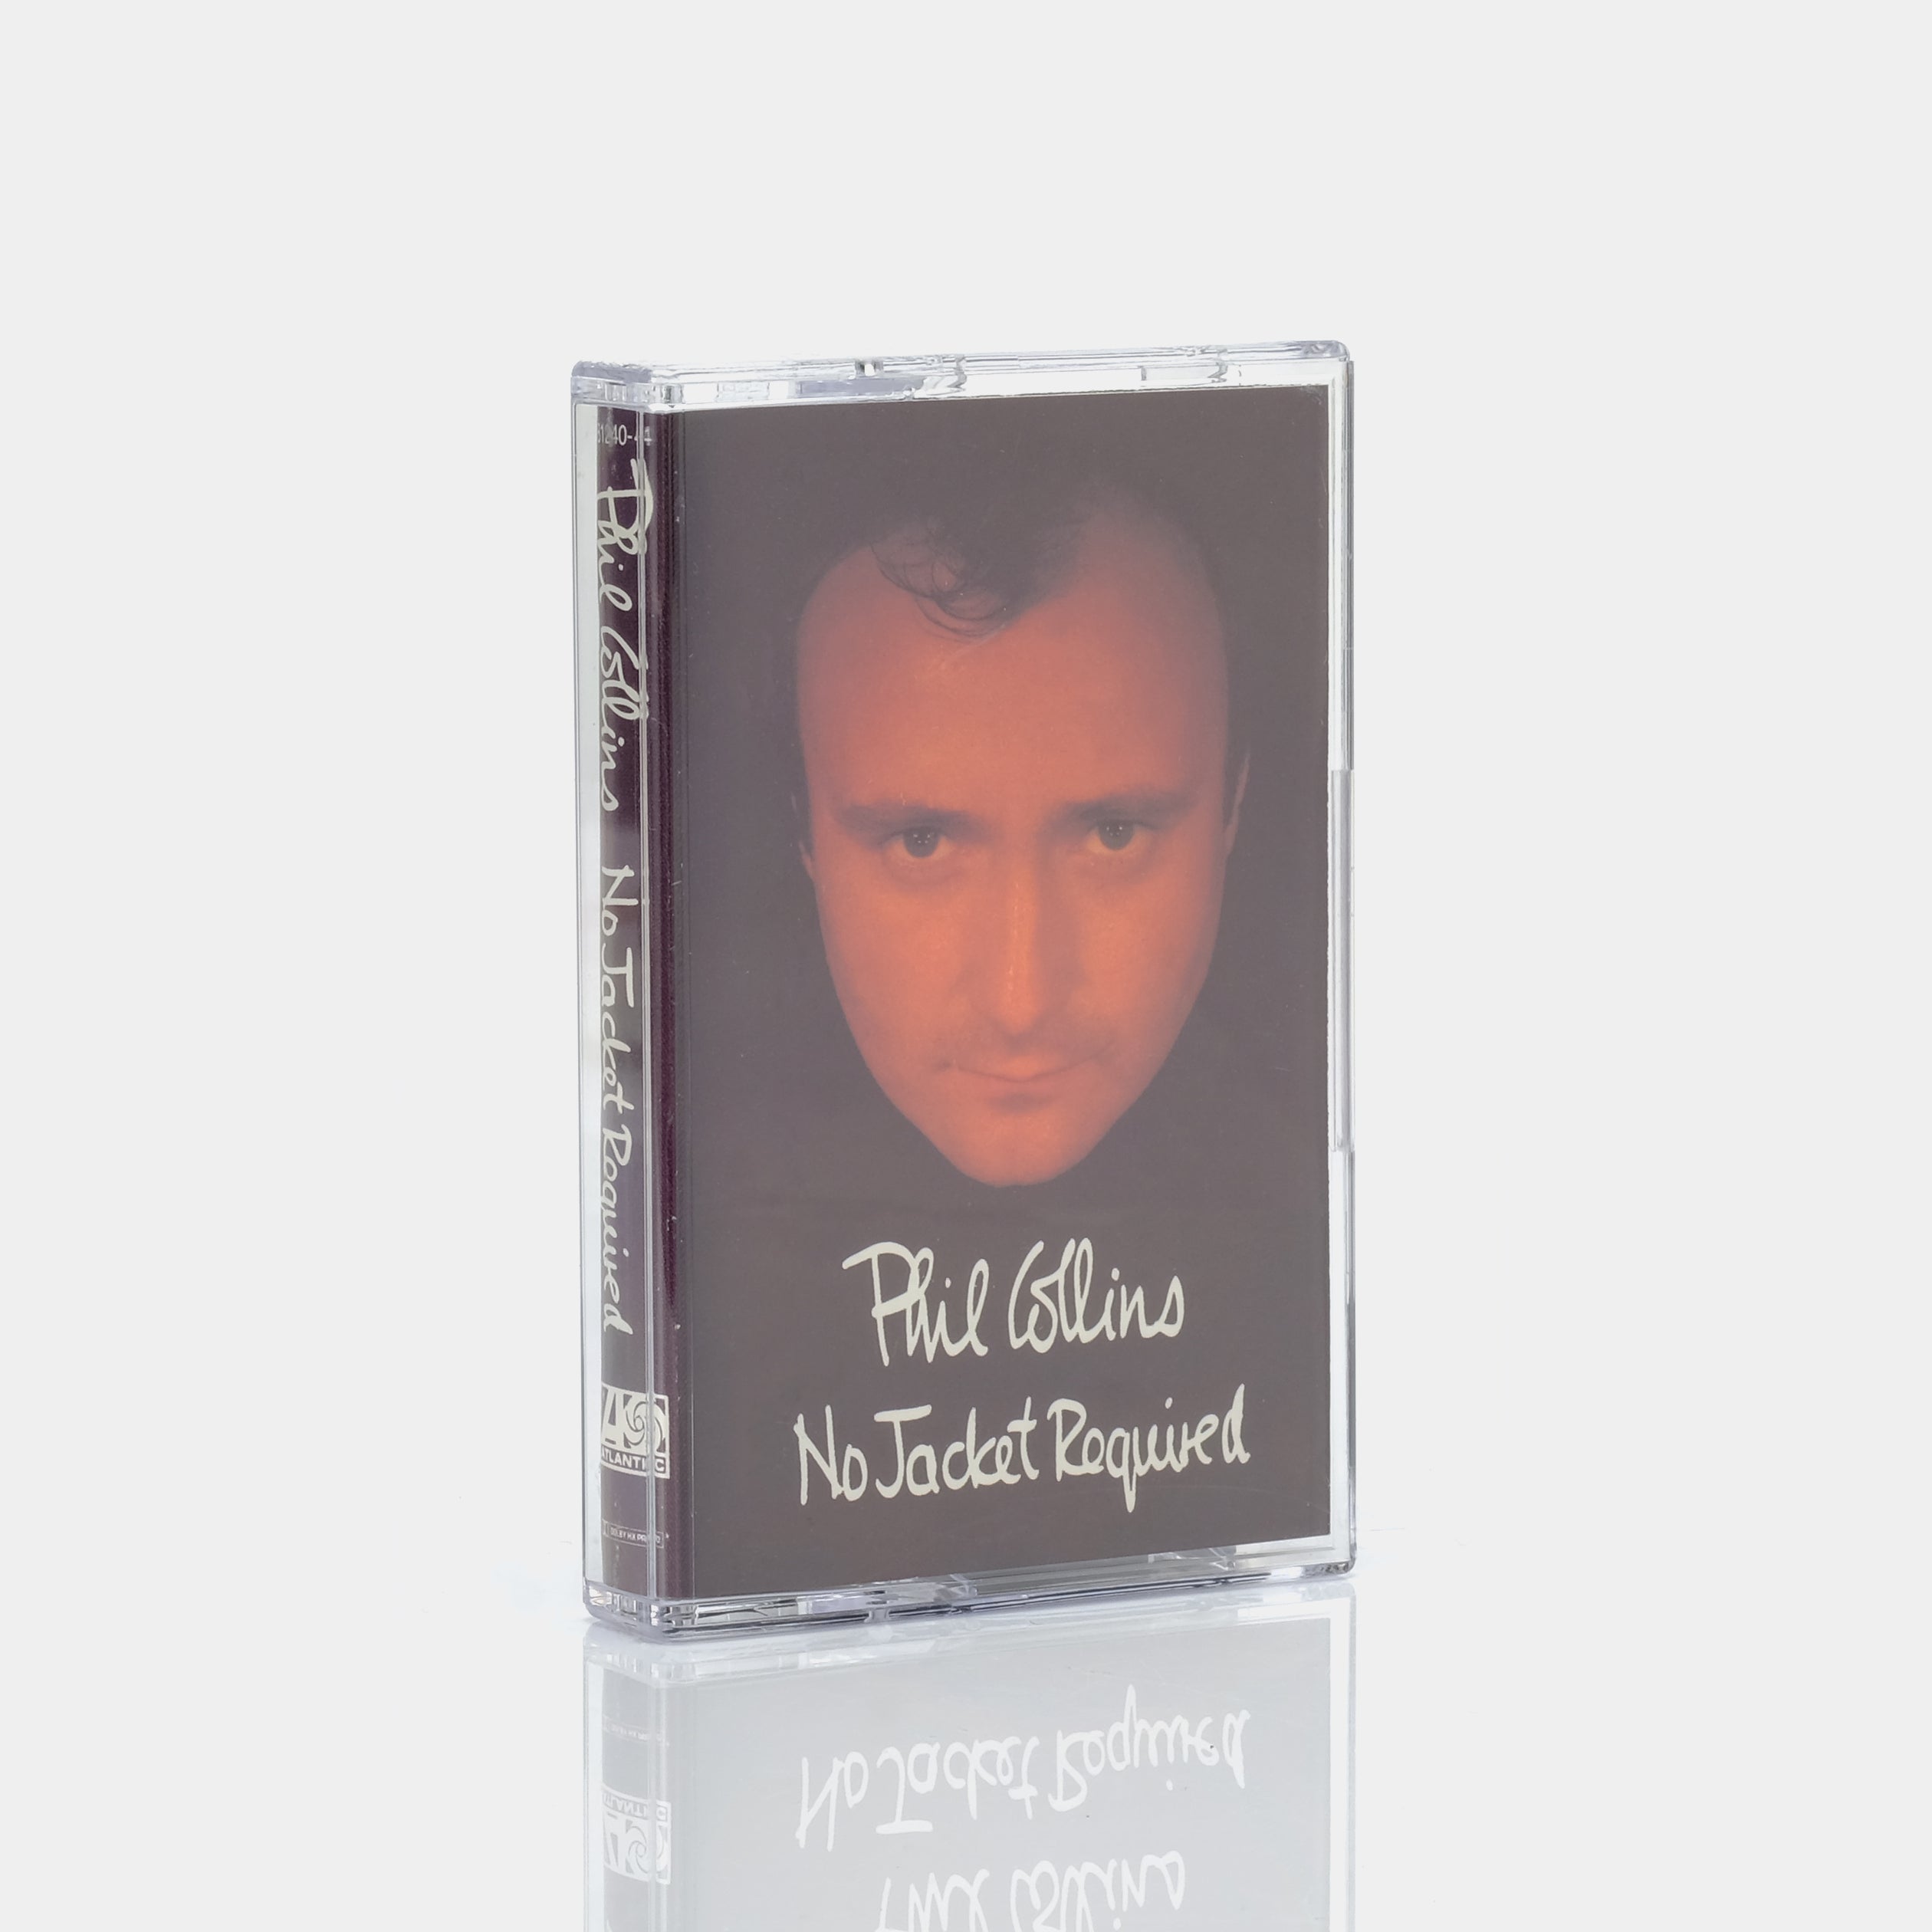 Phil Collins - No Jacket Required Cassette Tape